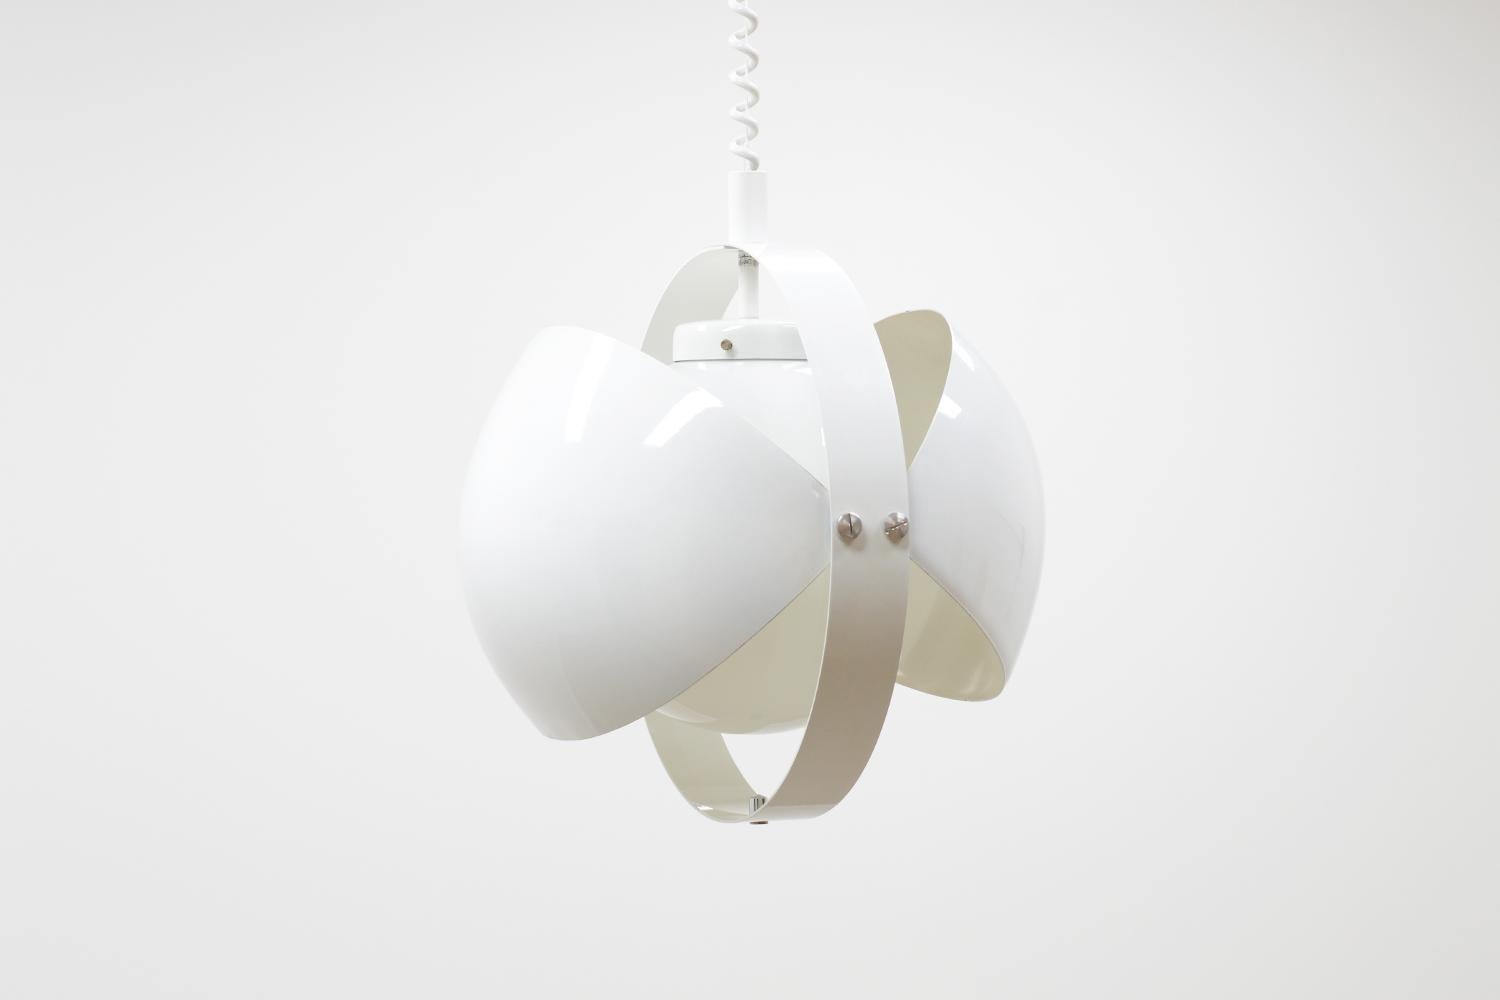 White “Eclipse” pull down pendant by Dijkstra lampen 70s. The lamp is adjustable in height and 2 shades that are adjustable separately. Light wear on inevitable points, overall in very good vintage condition. We have a 2nd one.

Measurements:
–